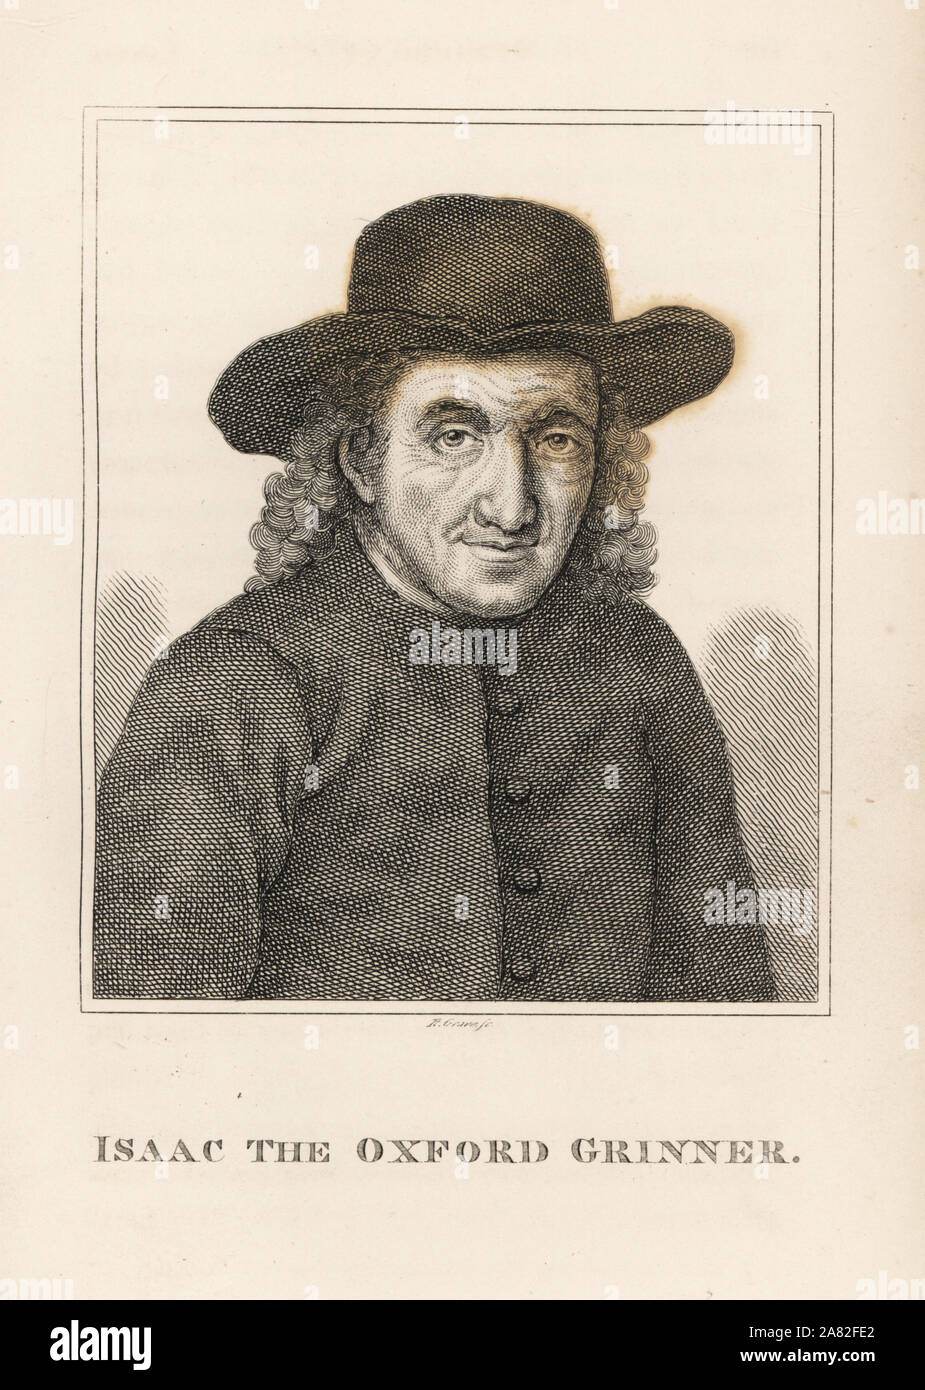 Isaac the Oxford Grinner, grimacing performer at fairs around the country, 18th century. Engraving by R. Grave from James Caulfield's Portraits, Memoirs and Characters of Remarkable Persons, London, 1819. Stock Photo